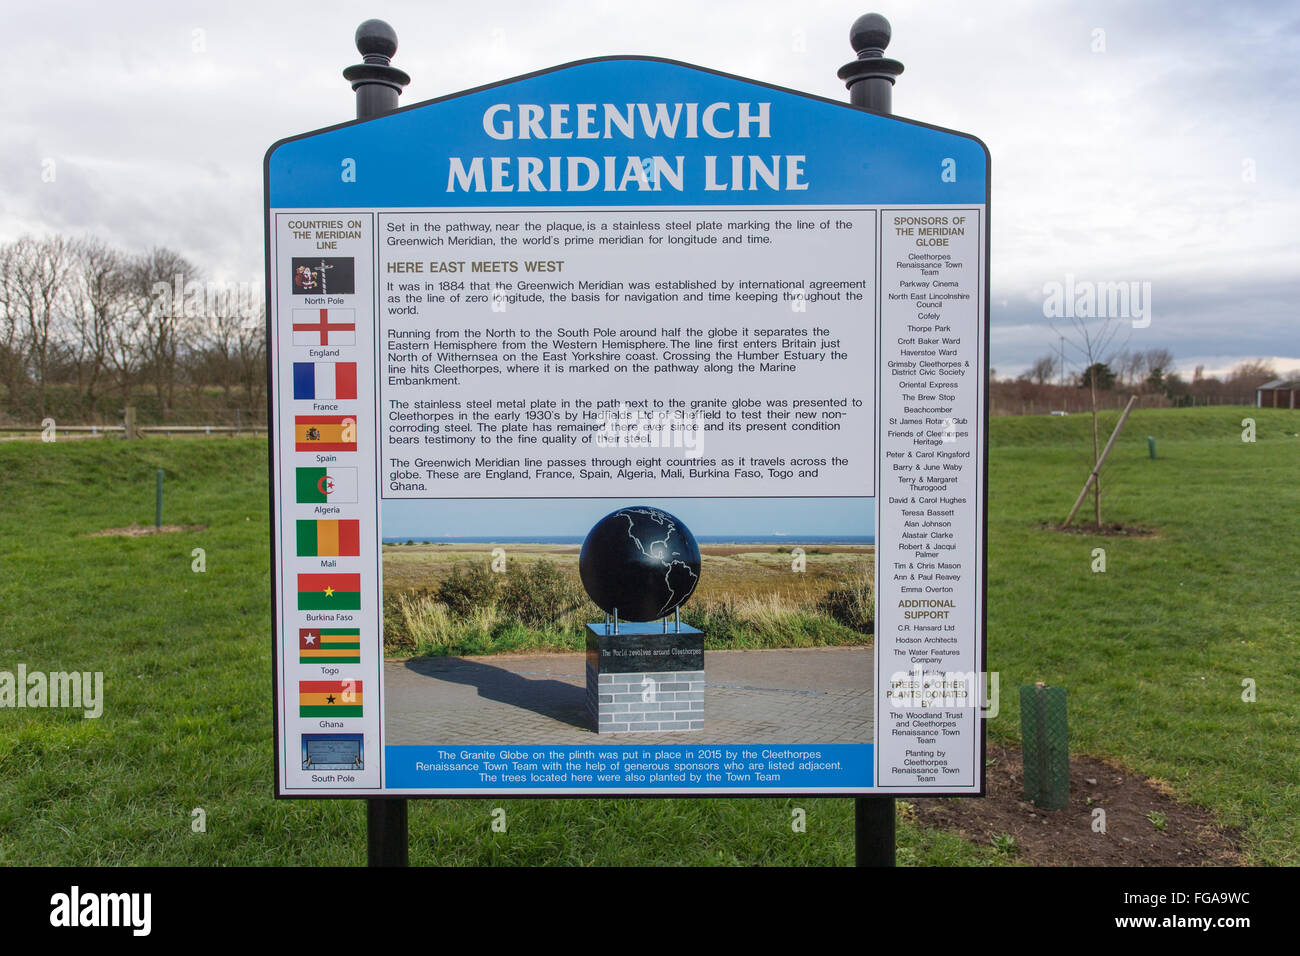 Greenwich Meridian Line at Cleethorpes Lincolnshire UK. Stock Photo